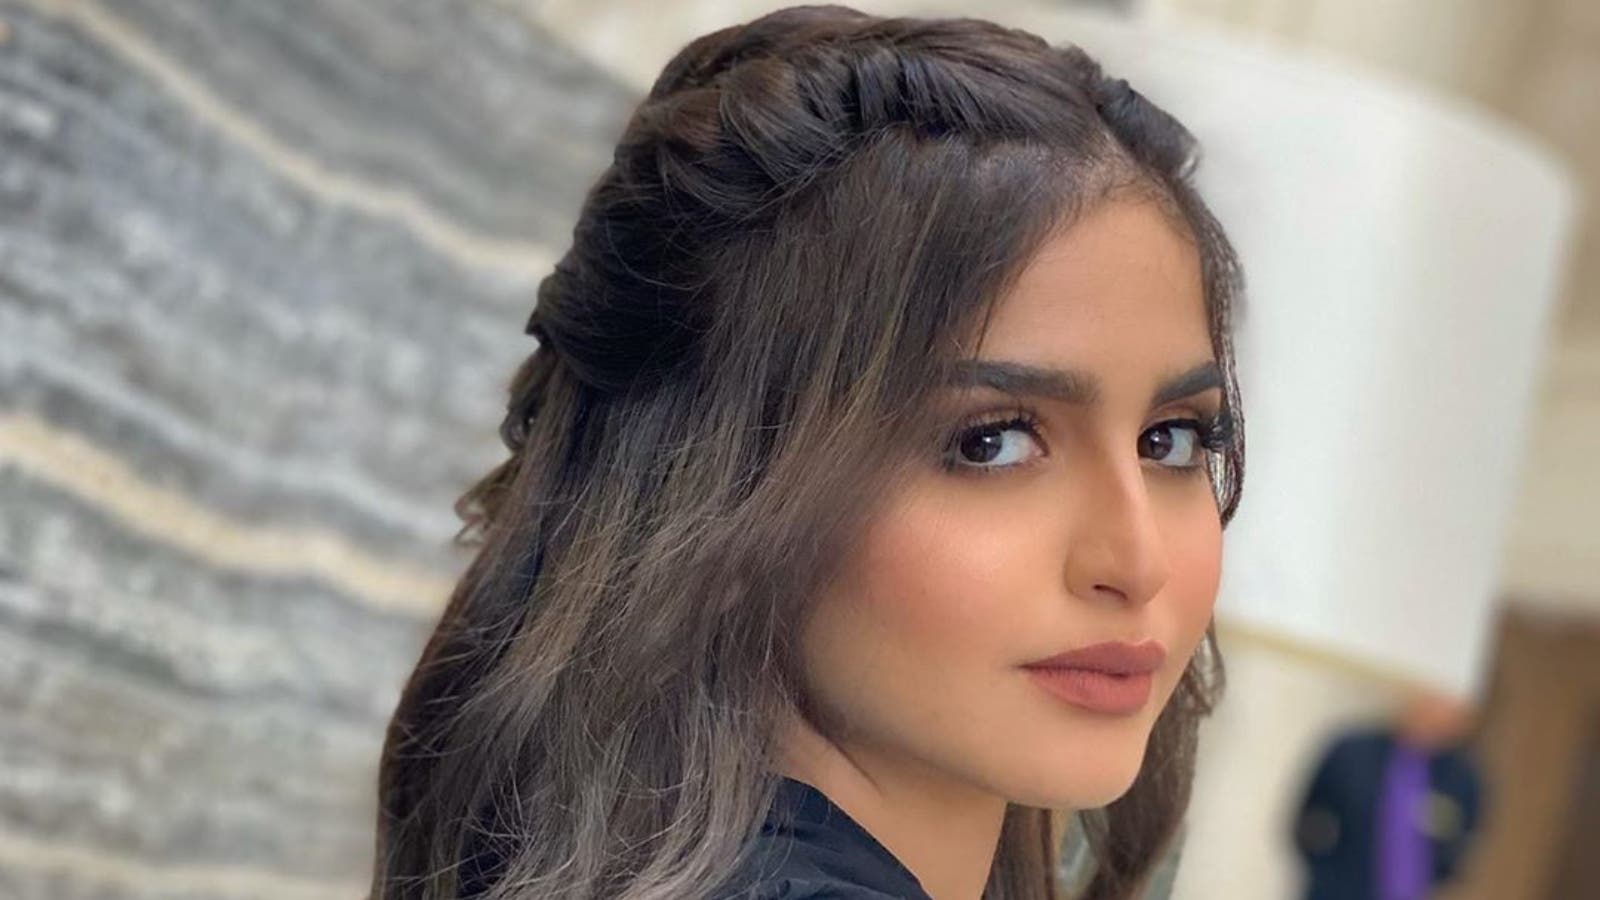 Booty Up. Camera On! Hala Al Turk Under Fire for Putting Her Curves on Display (Video)